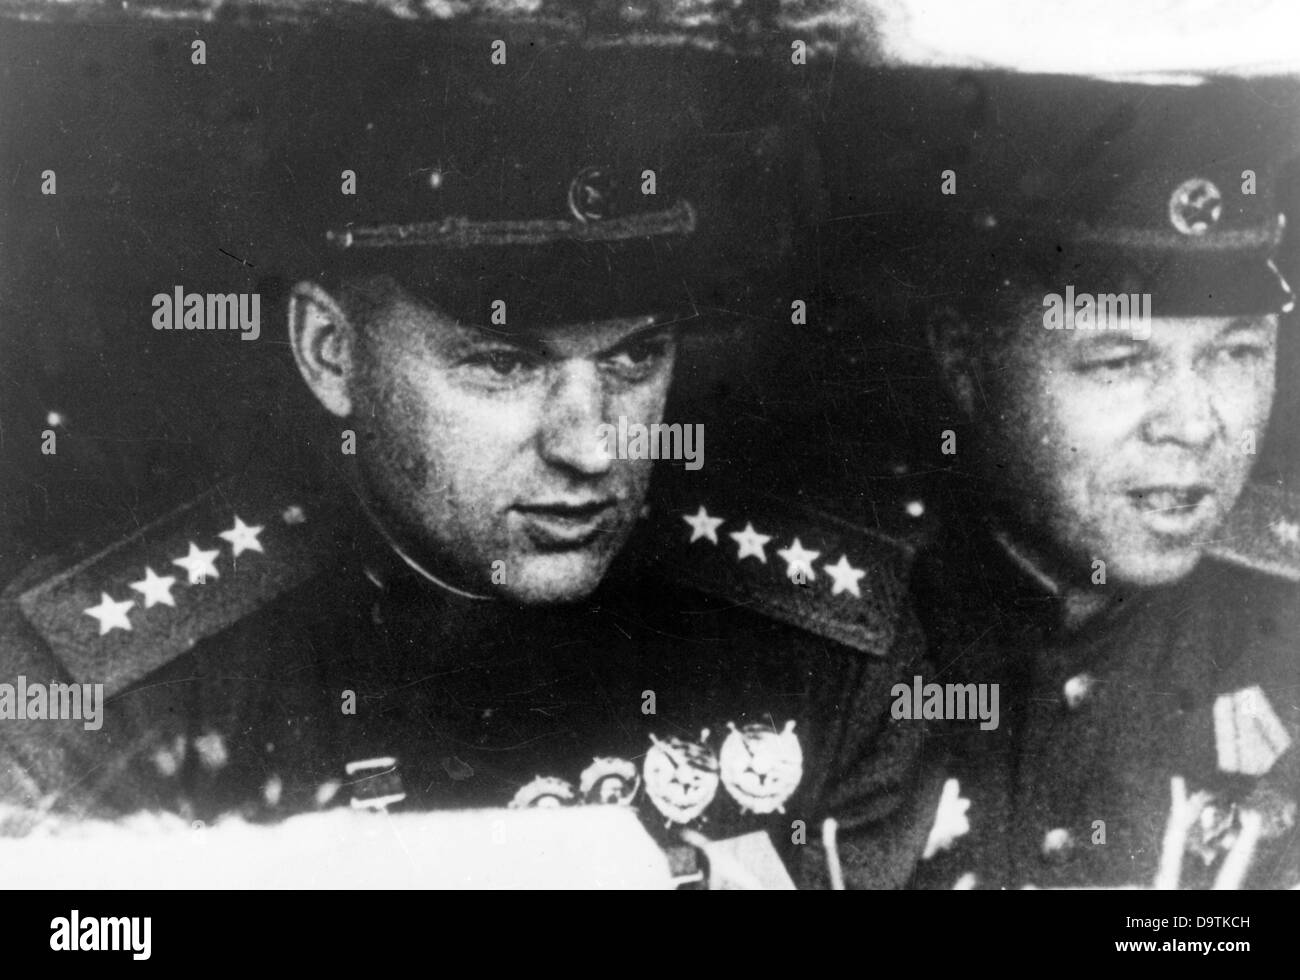 Soviet Generals Nicolai Vatutin (r), commander of the Voronezh Front, and Konstantin Rokossovsky, Commander of the Central Front, during the Battle of Kursk in 1943. The attack, the so-called 'Operation Citadel', was the last major offensive operation of the German Wehrmacht against the Soviet Union and took place between 5 and 16 July 1943. Fotoarchiv für Zeitgeschichte Stock Photo